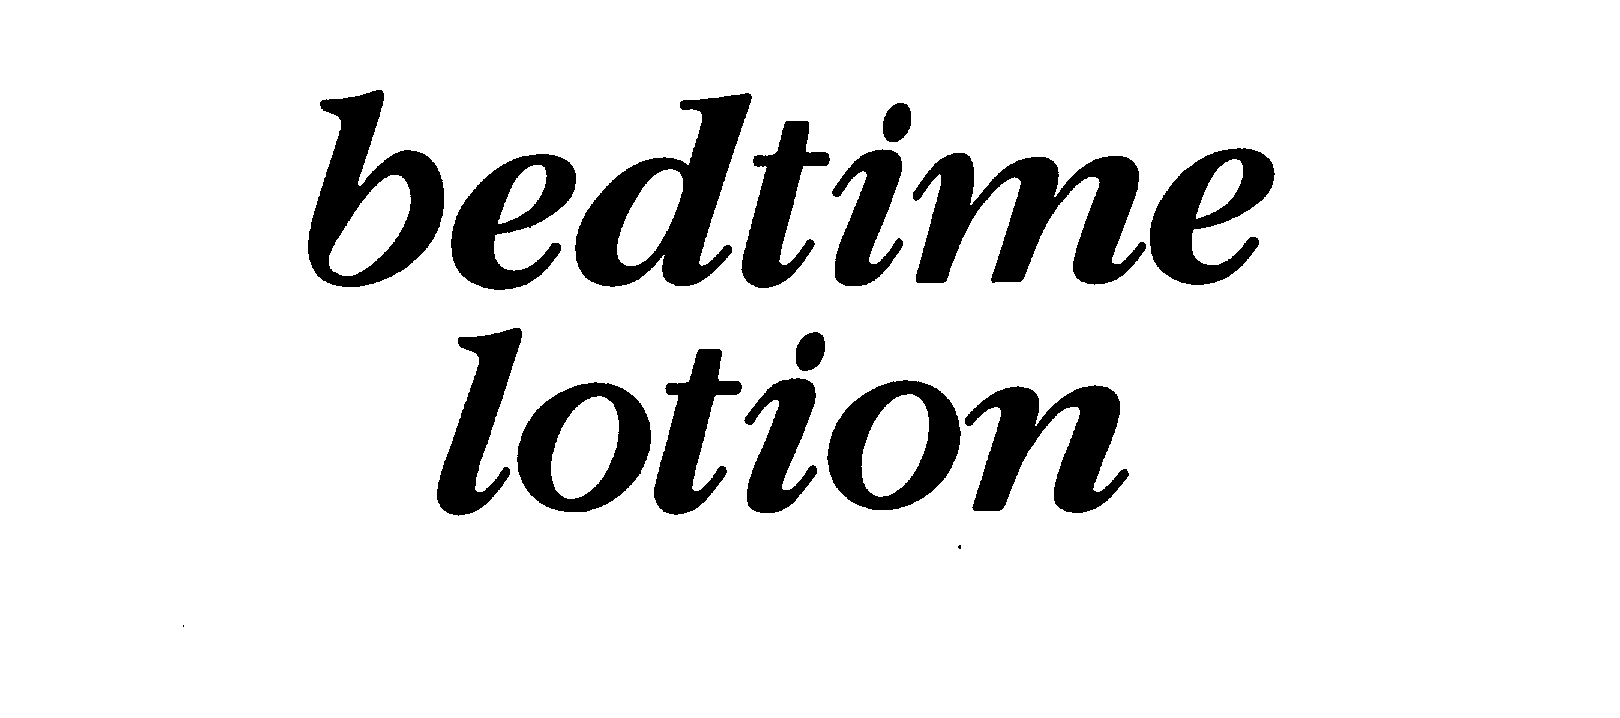  BEDTIME LOTION